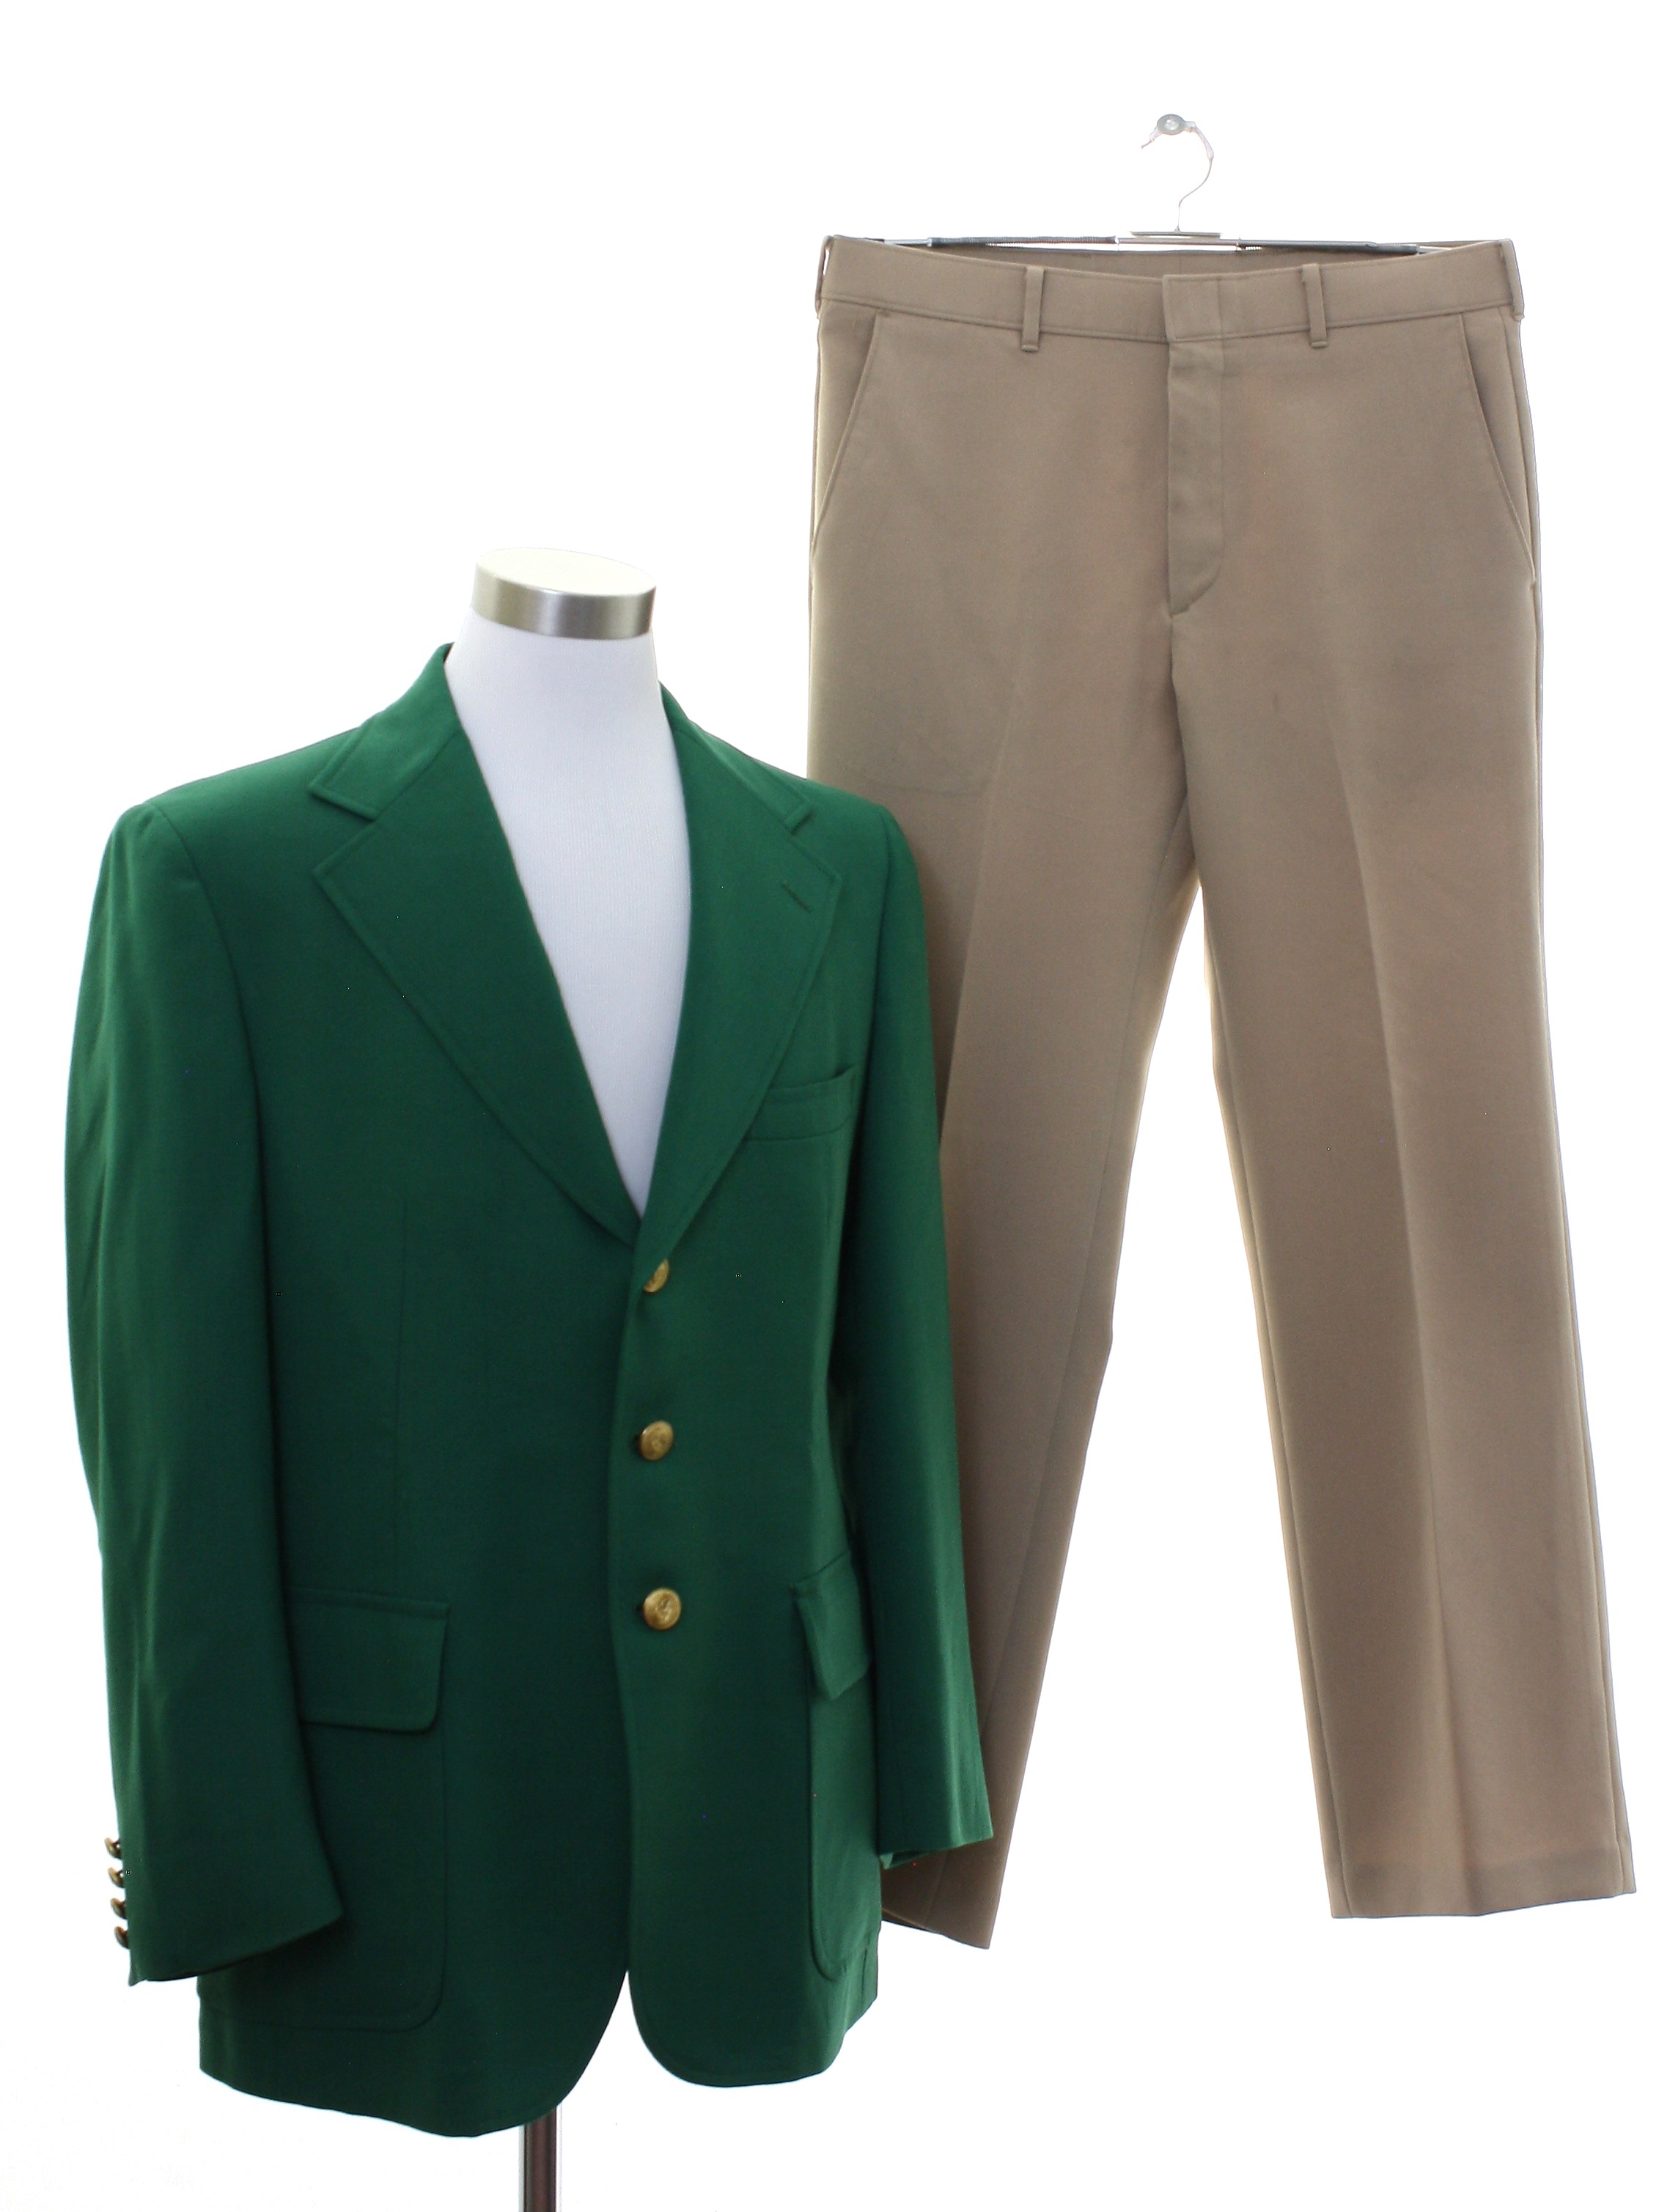 1970's Disco Suit (Chaps by Ralph Lauren): 70s style (made in 80s